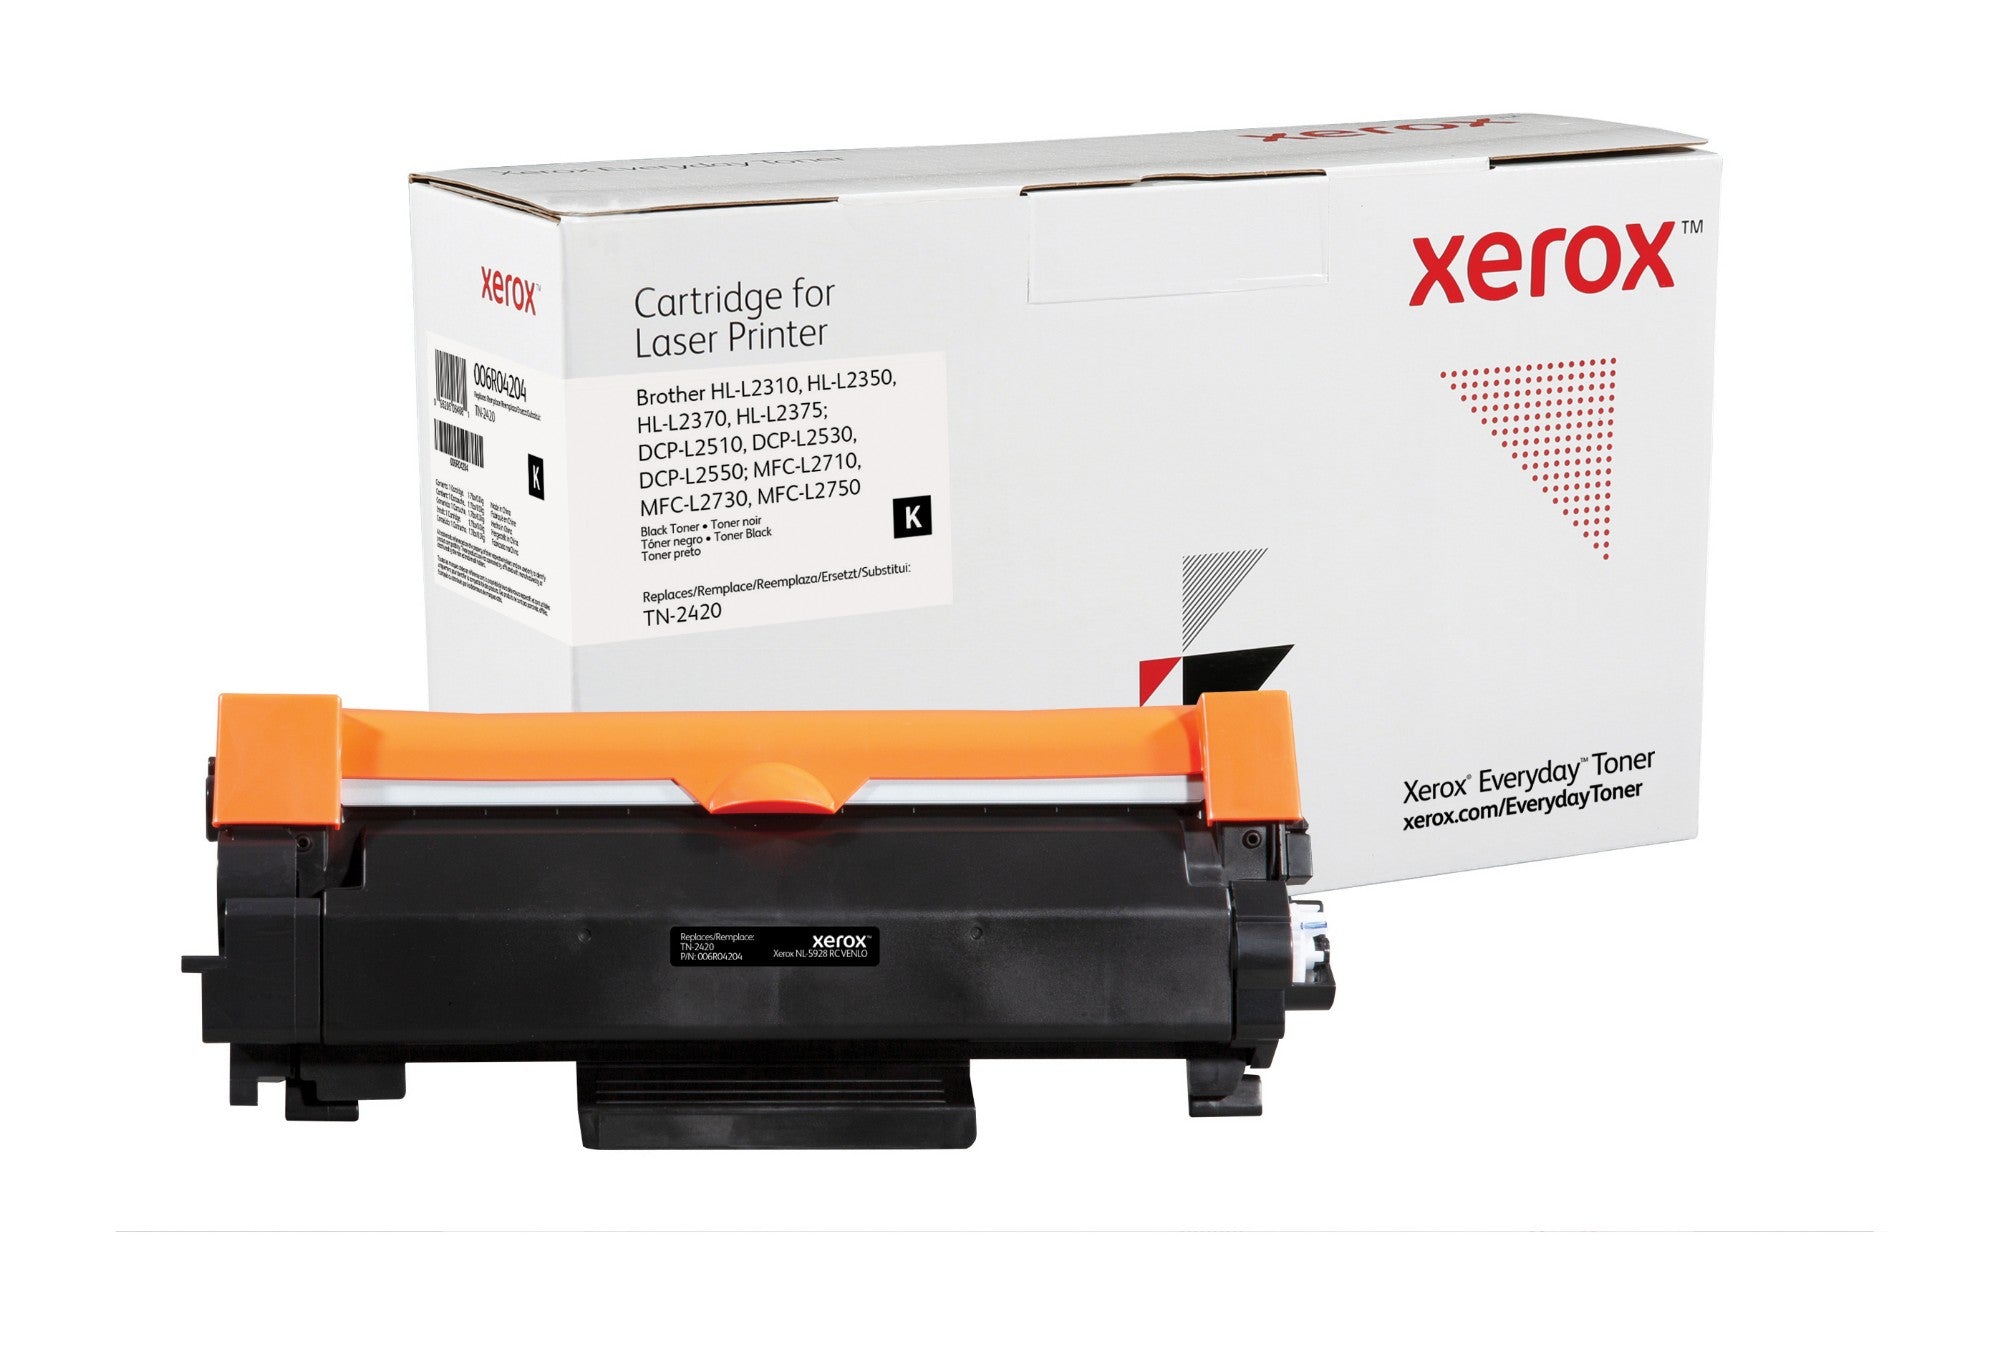 Xerox 006R04204 Toner-kit, 3K pages (replaces Brother TN2420) for Brother HL-L 2310